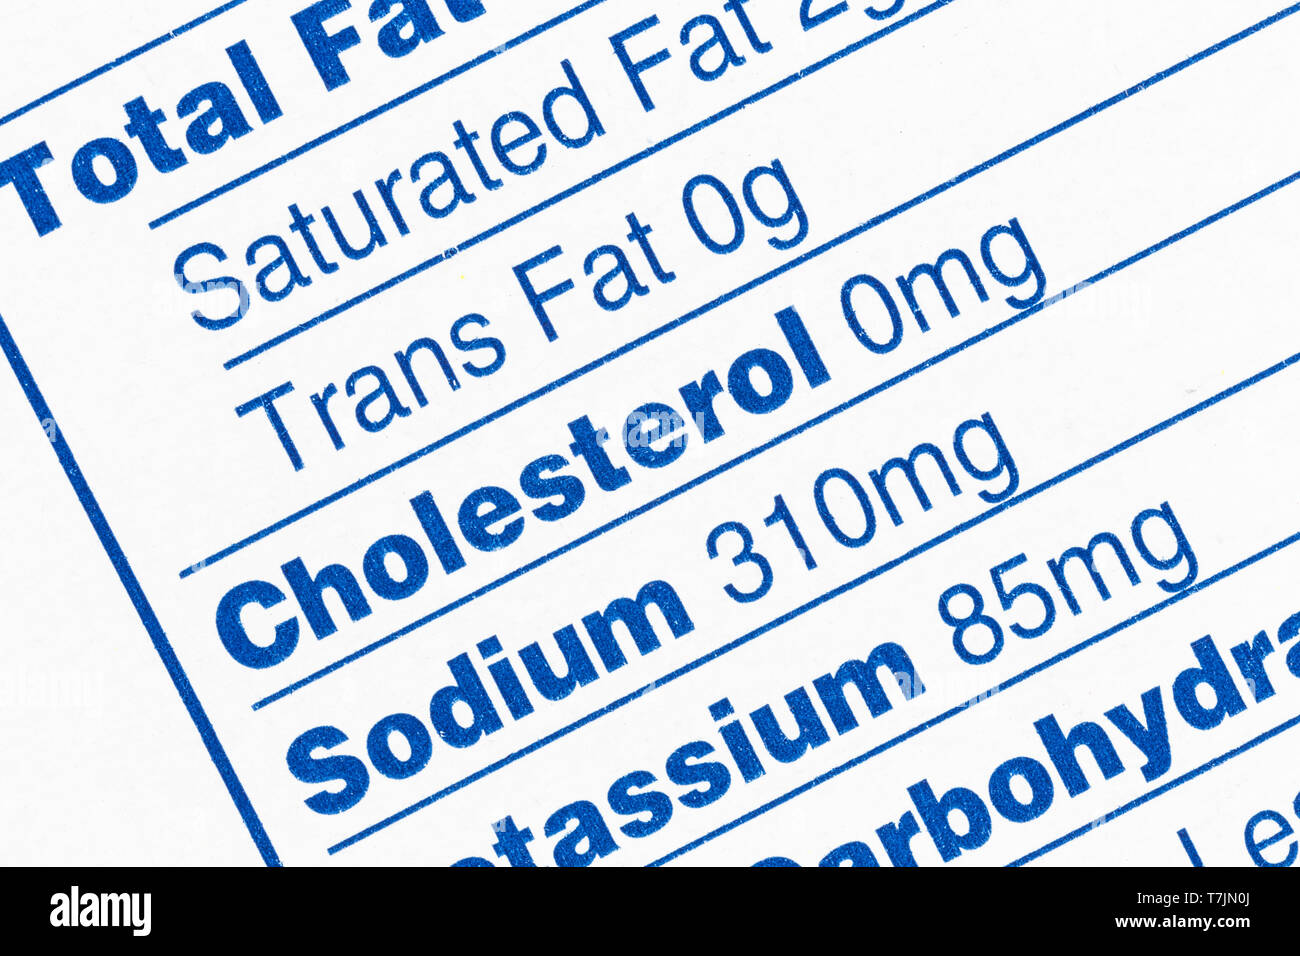 Macro close up detail of standard food nutrition facts information box.  With focus on Trans Fat, Cholesterol and Sodium information. Stock Photo